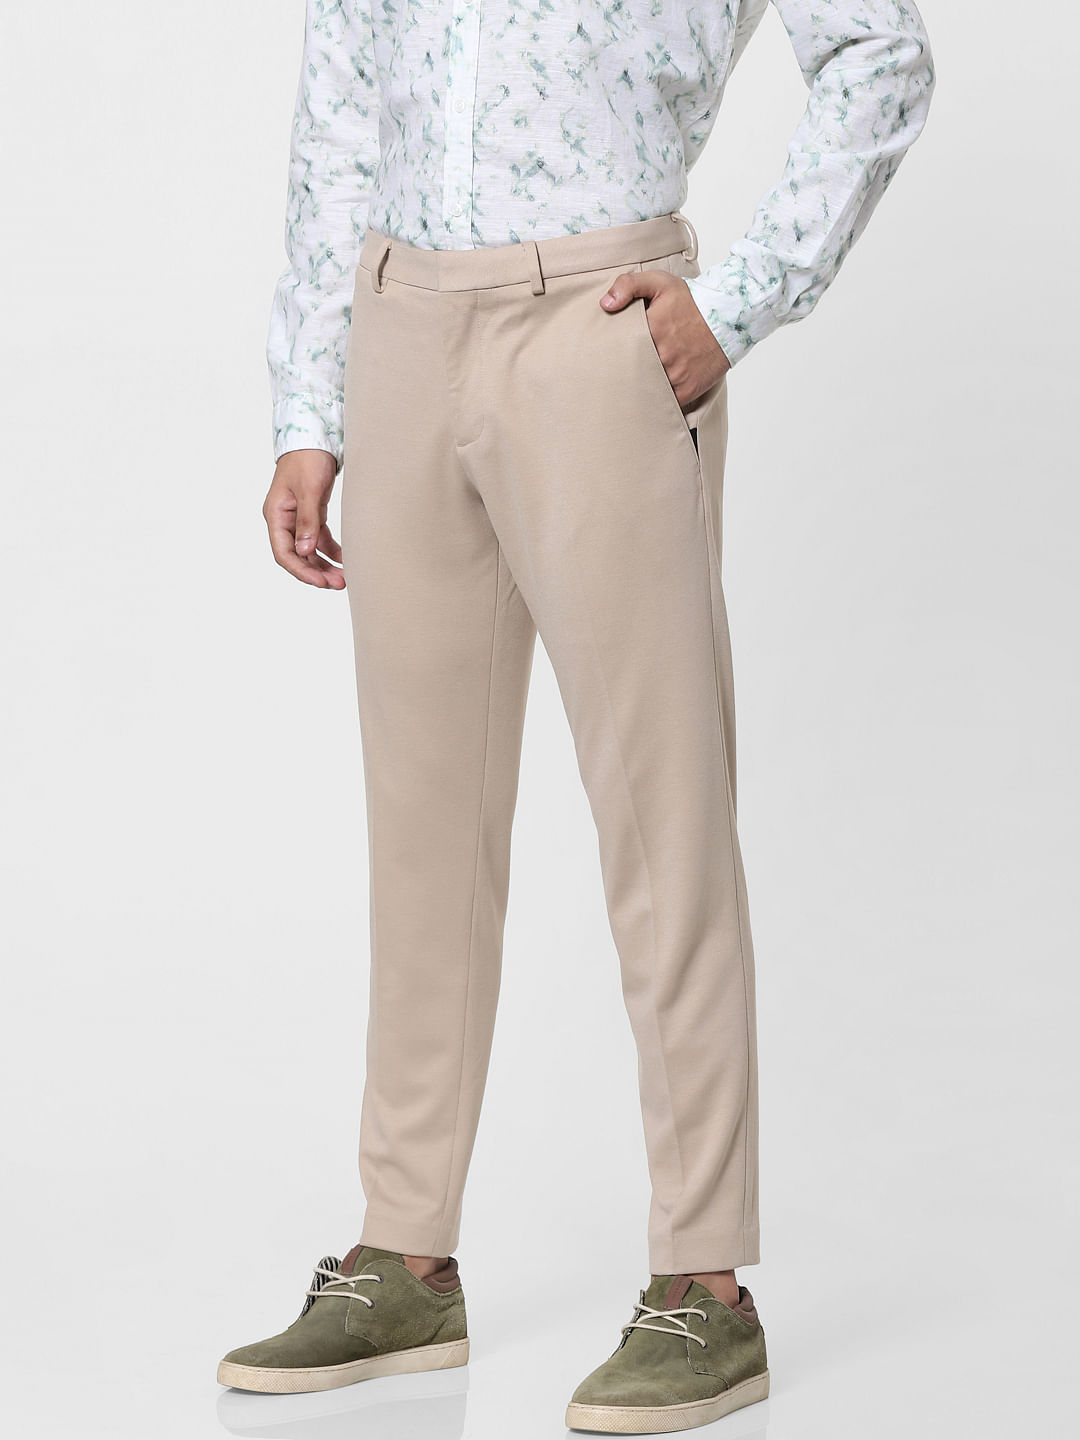 Textured Formal Trousers In Beige B95 Mandy